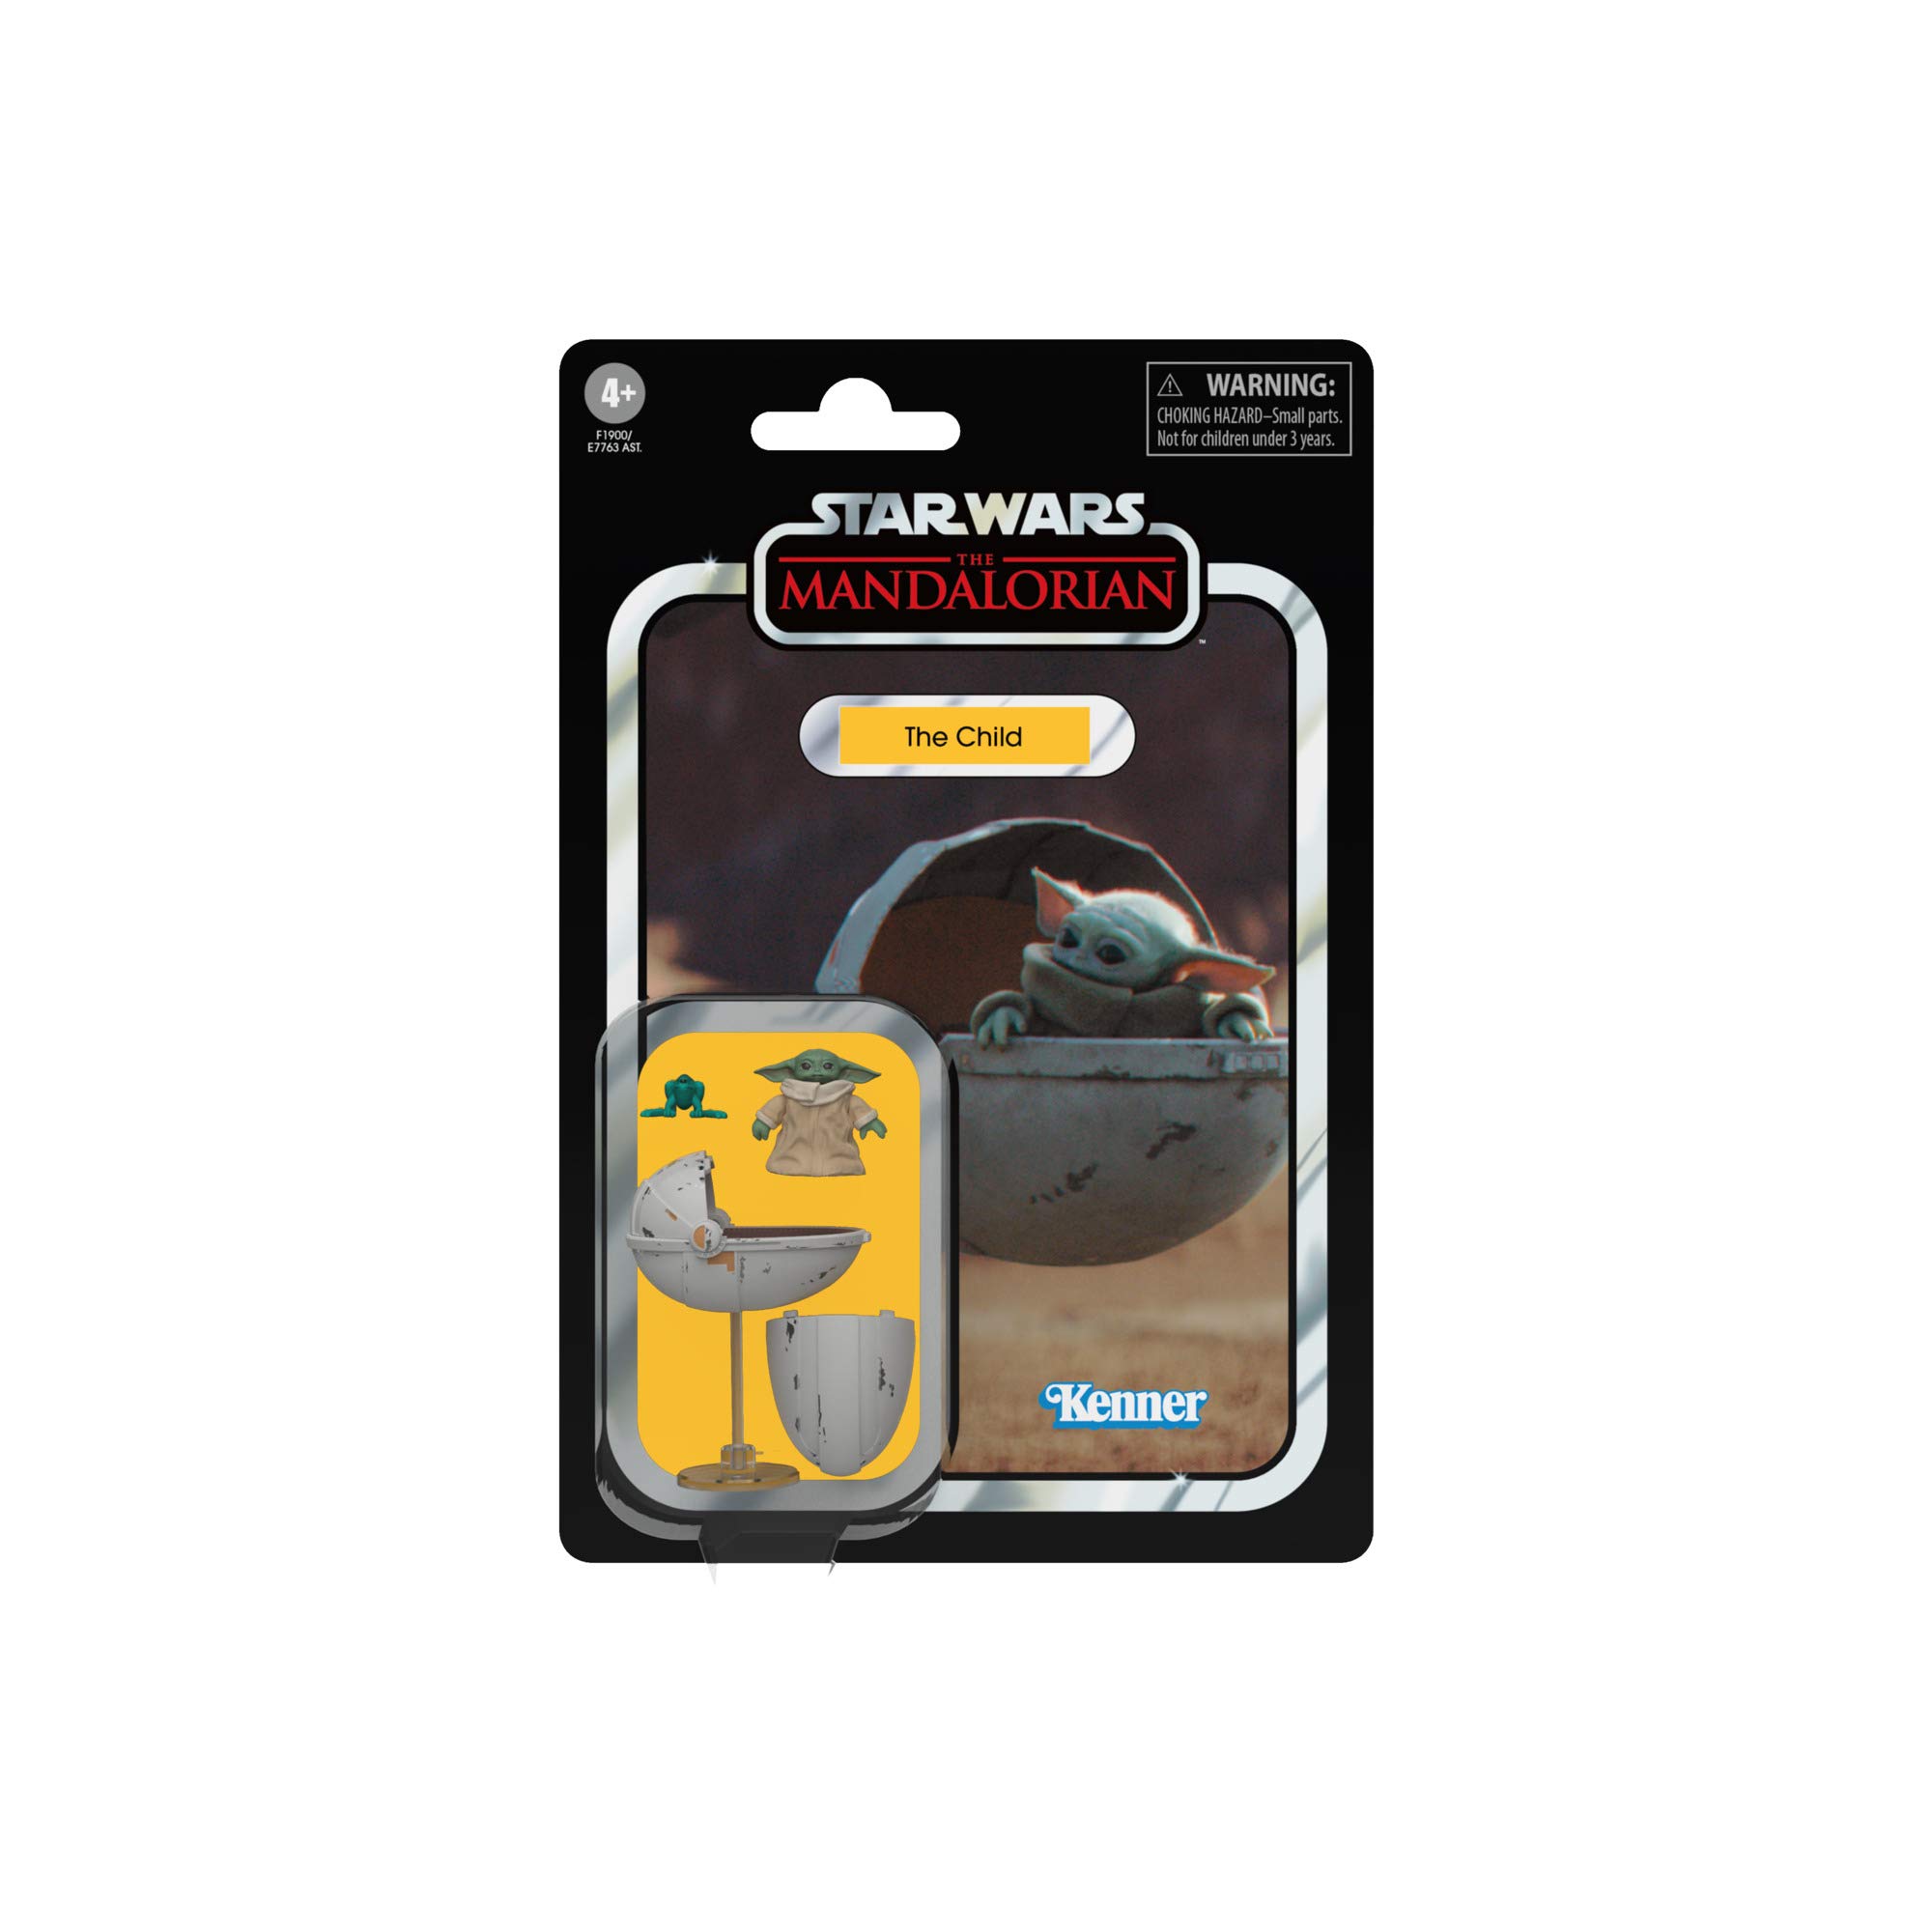 STAR WARS The Vintage Collection The Child with Pram Toy, 3.75-inch-Scale The Mandalorian Action Figure, Toys for Kids Ages 4 and Up, Multicolored (F1900)